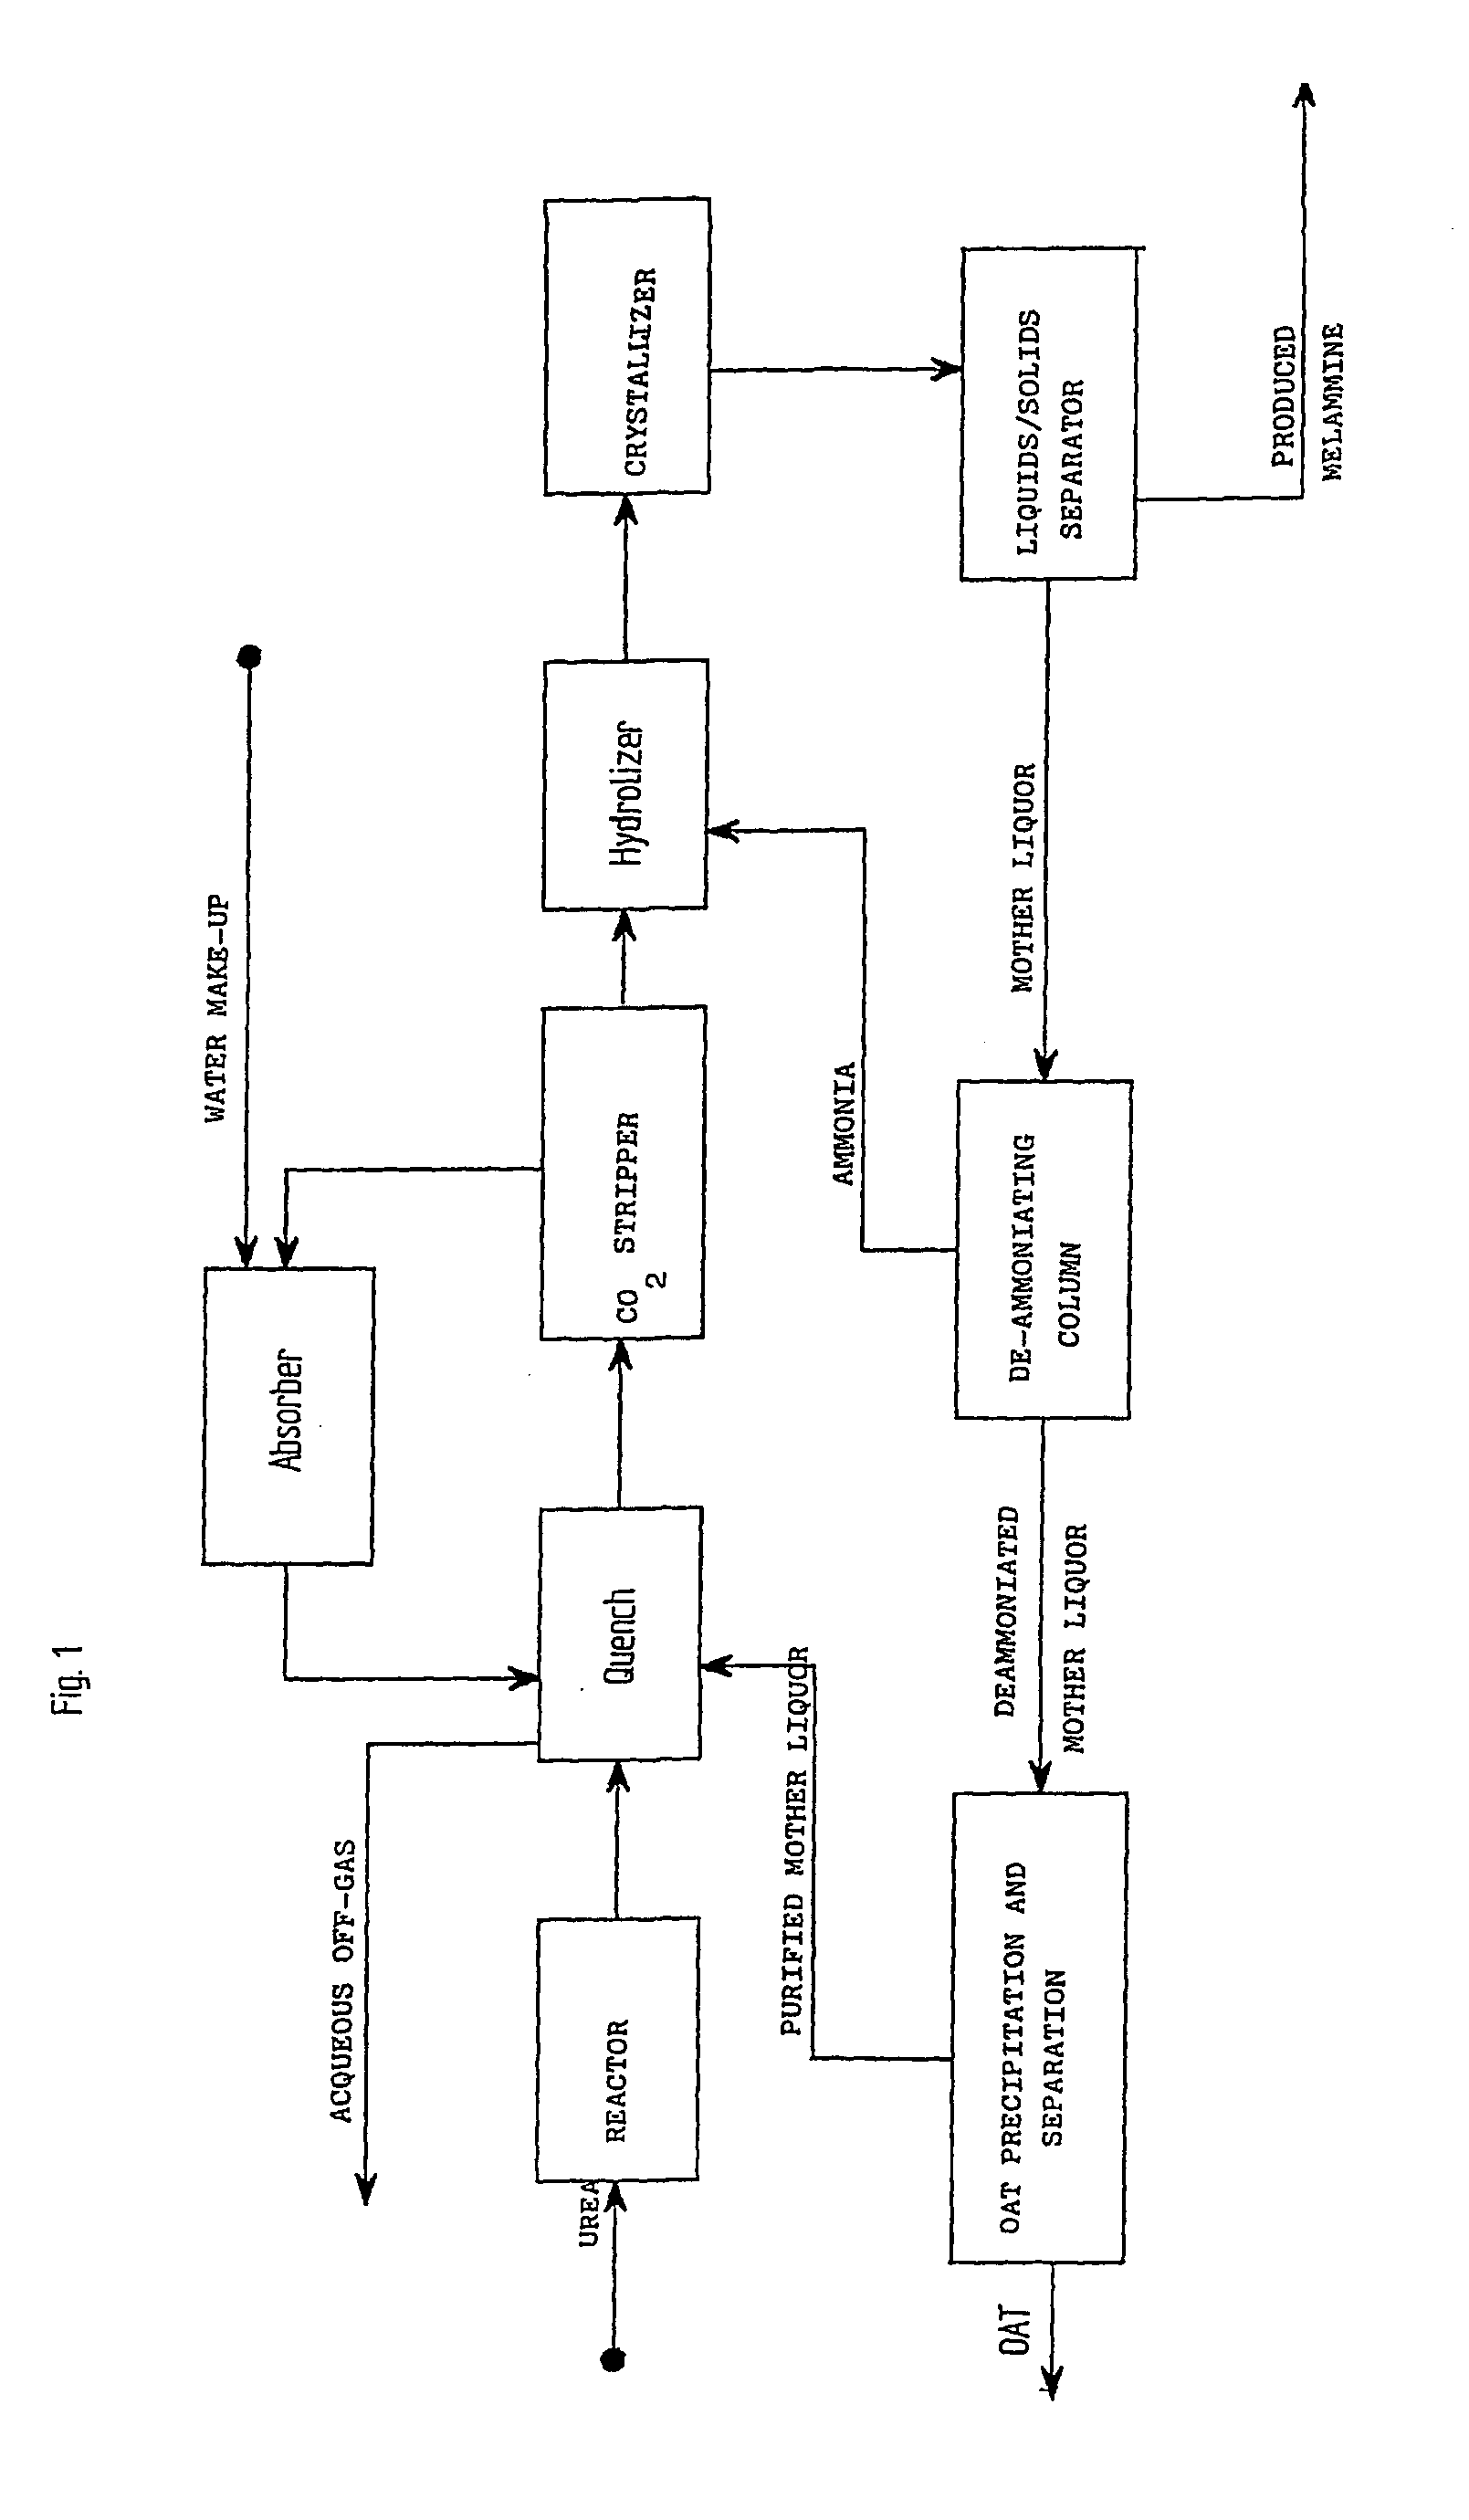 Procedure for the production of high-purity melamine with high yields